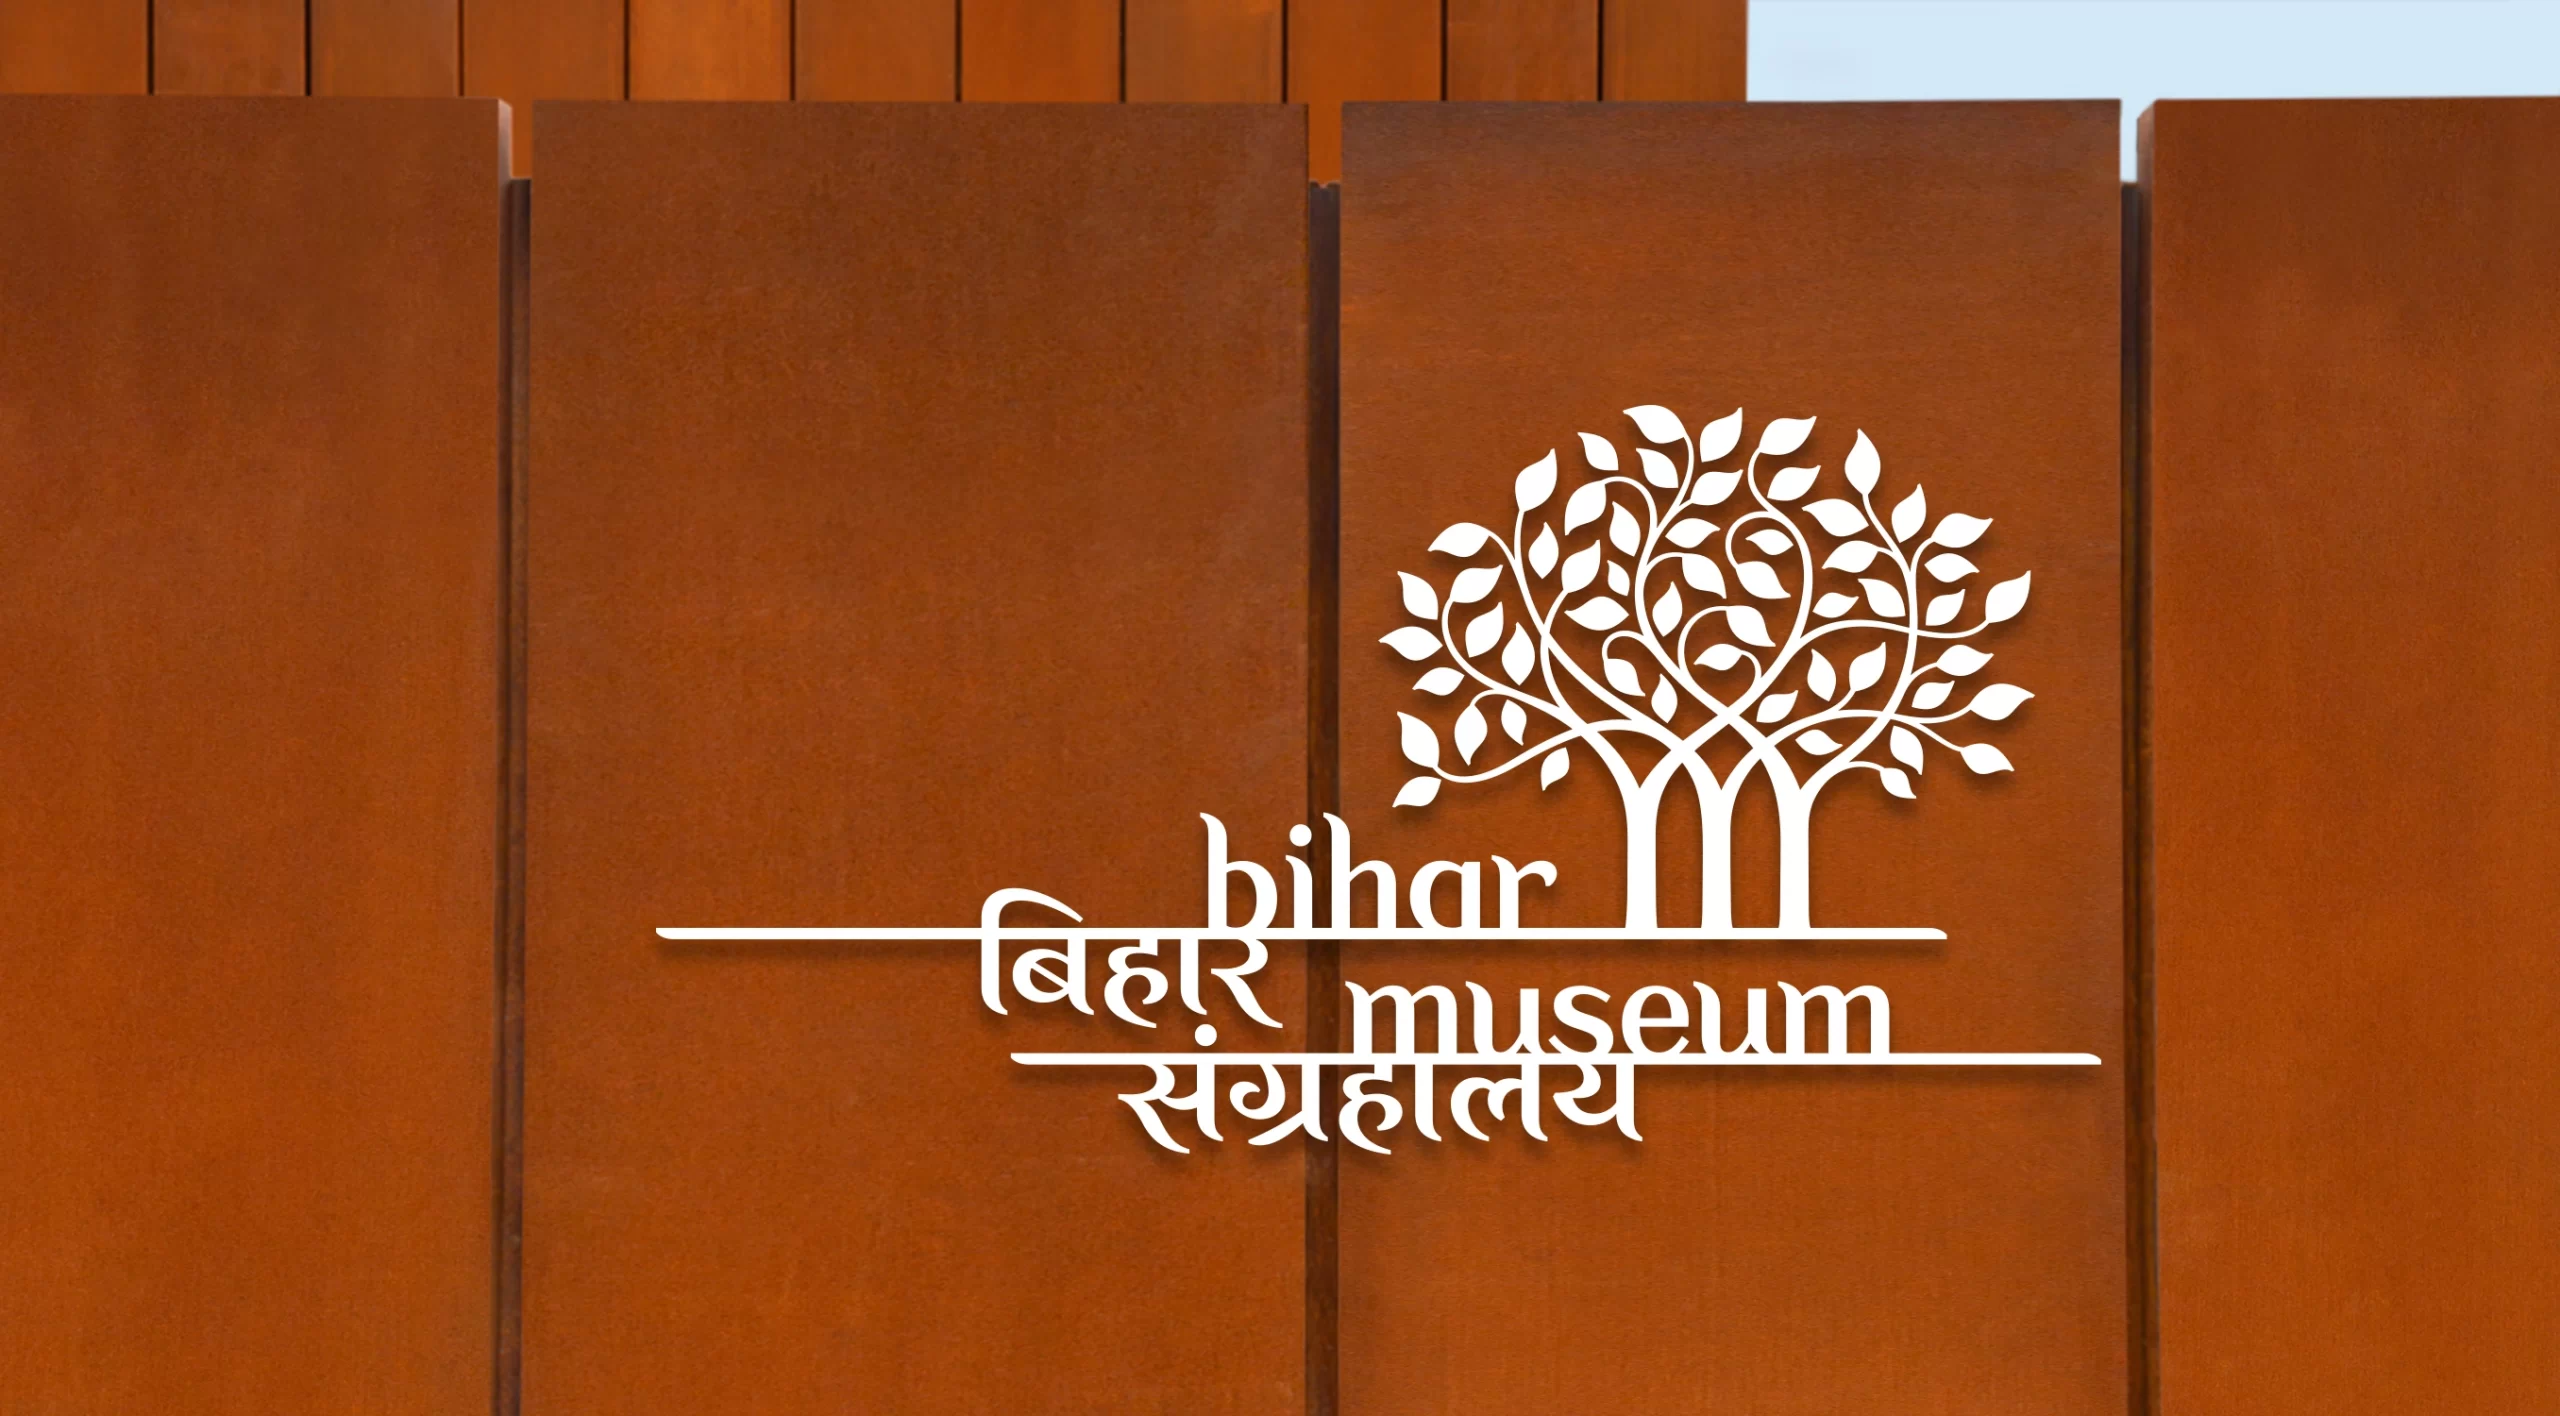 Brand identity and logo design for Bihar Museum by Lopez Design